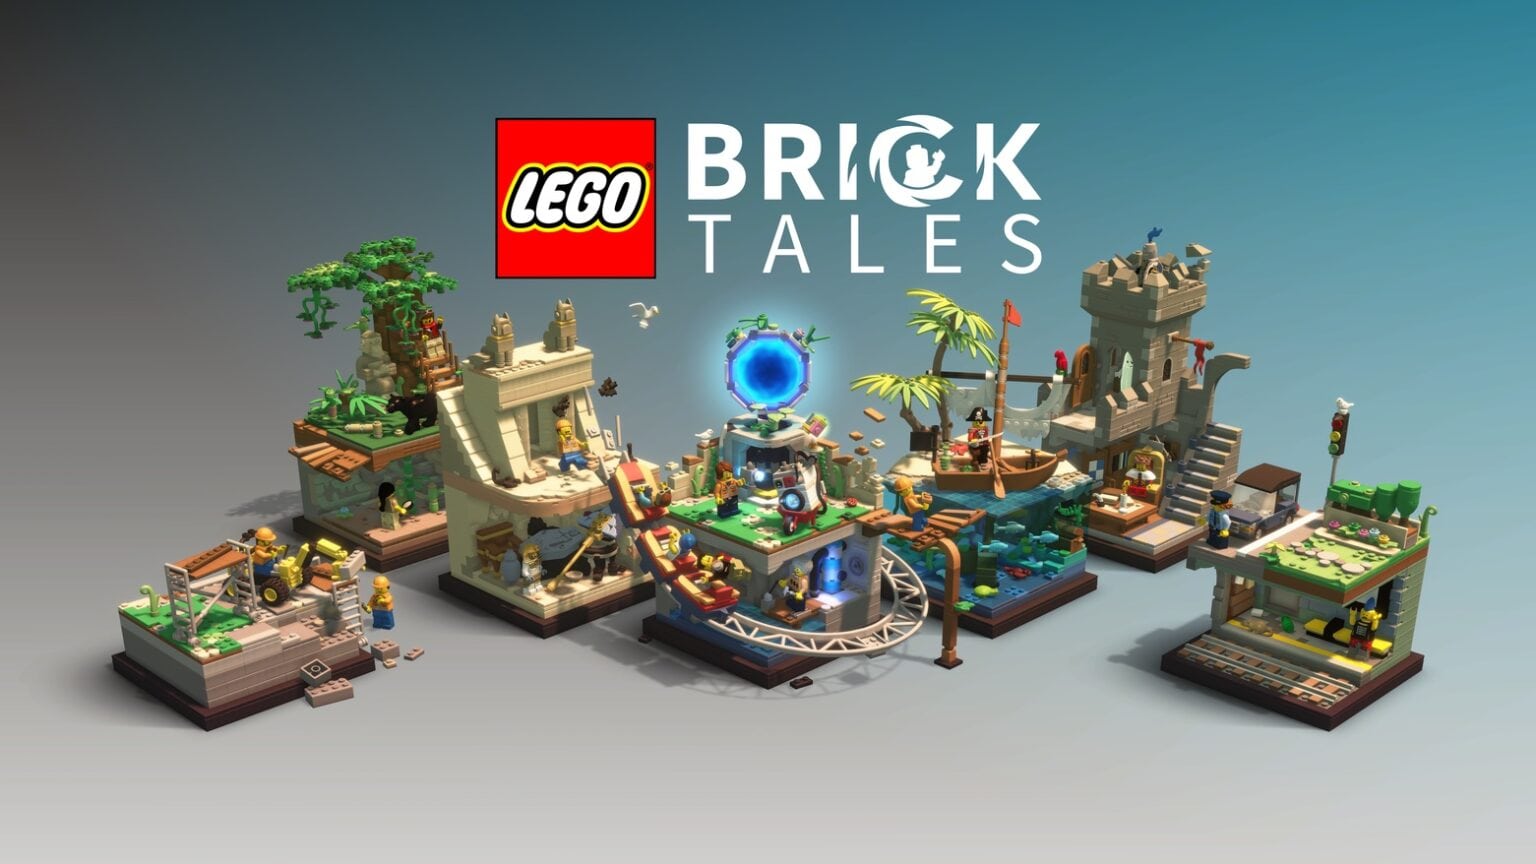 Enjoy tons of Legos without the clutter in 'Lego Bricktales'